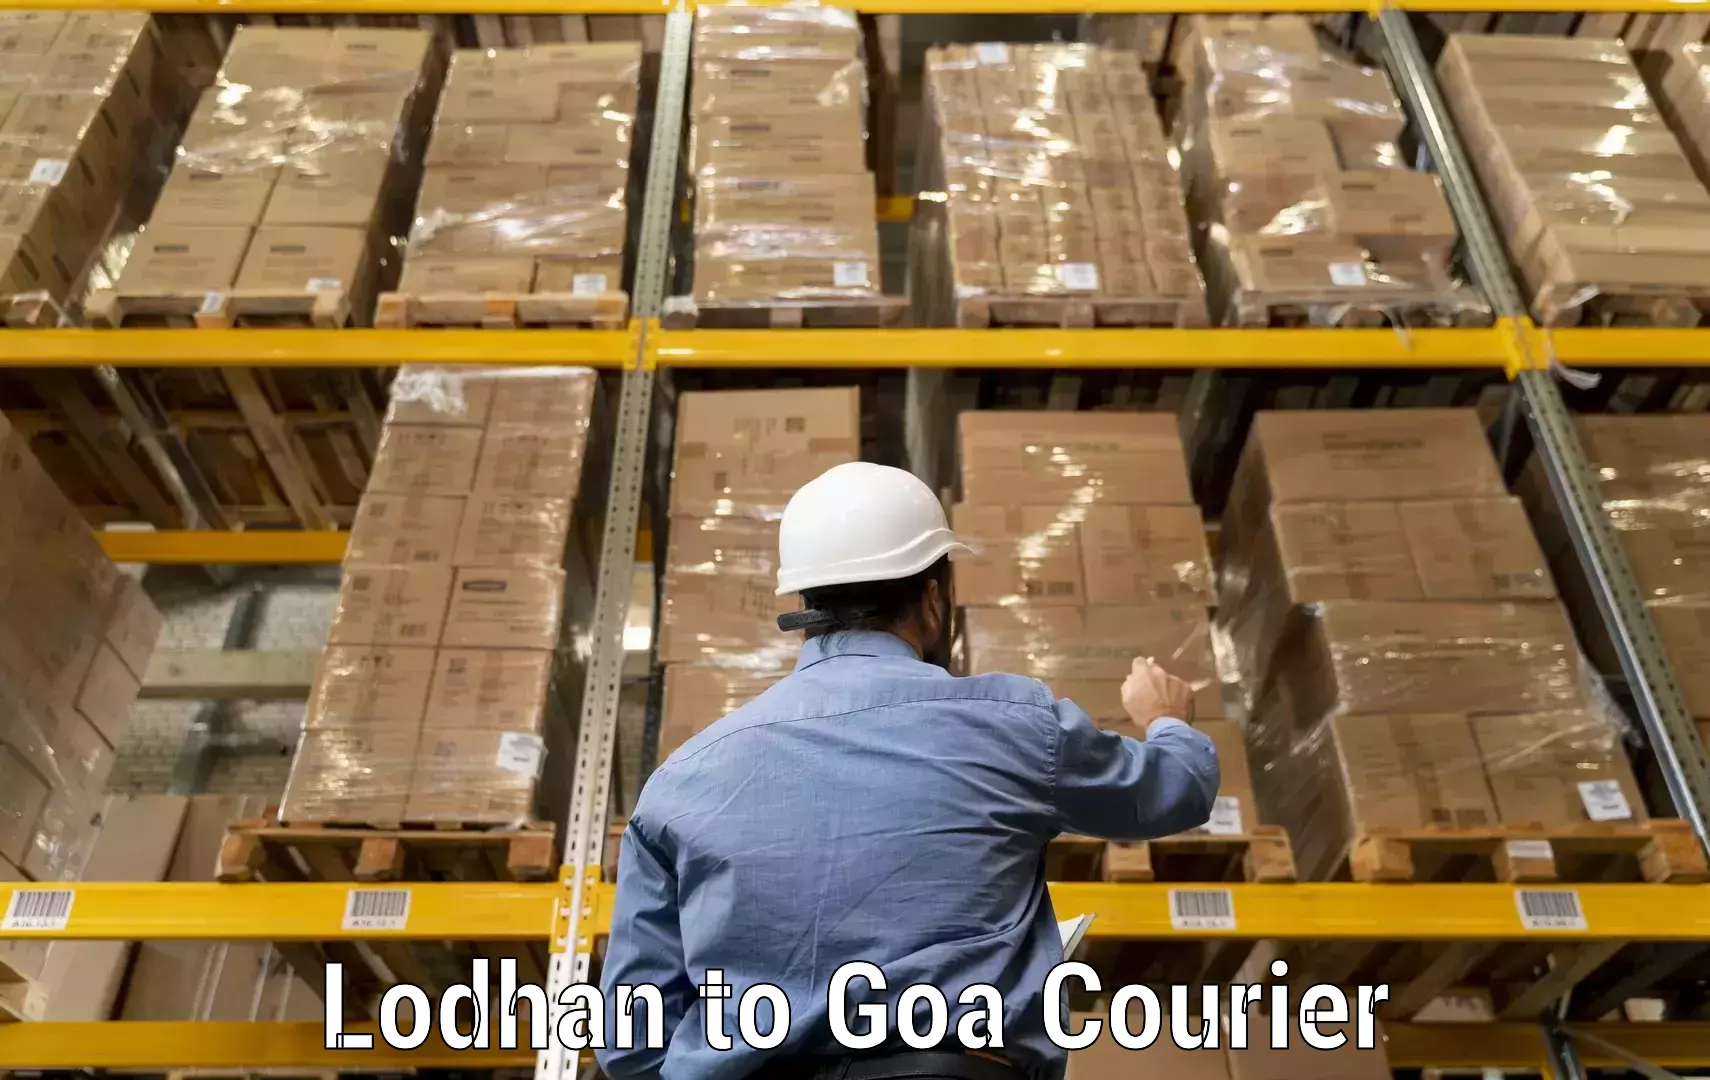 Courier services Lodhan to Vasco da Gama